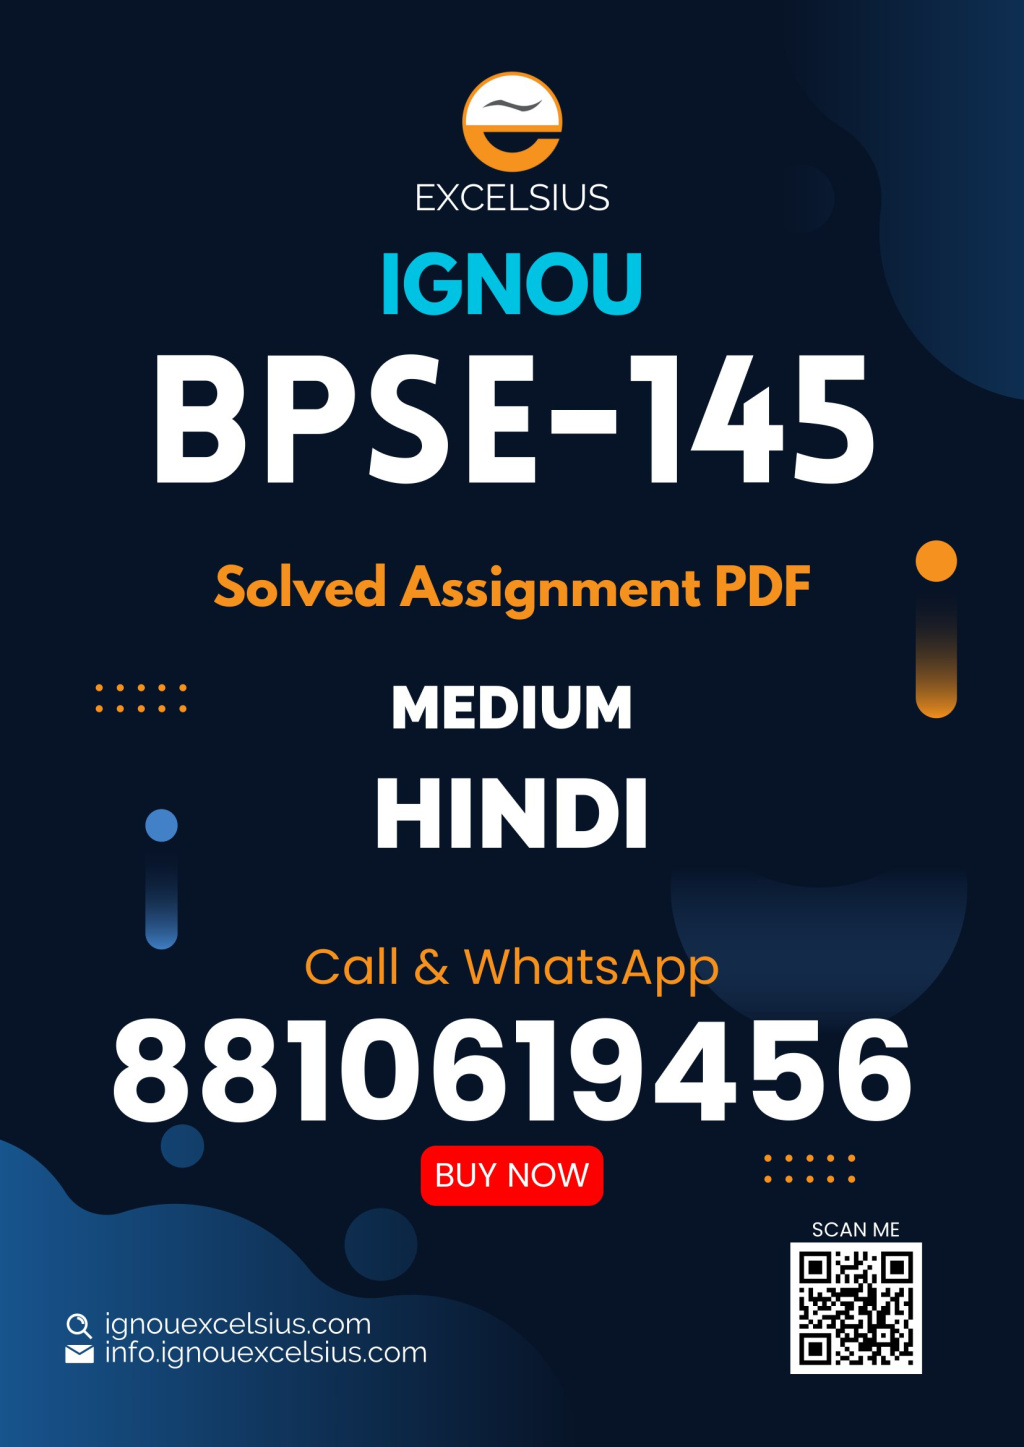 IGNOU BPSE-145 - Democracy and Development in Northeast India, Latest Solved Assignment-July 2022 – January 2023